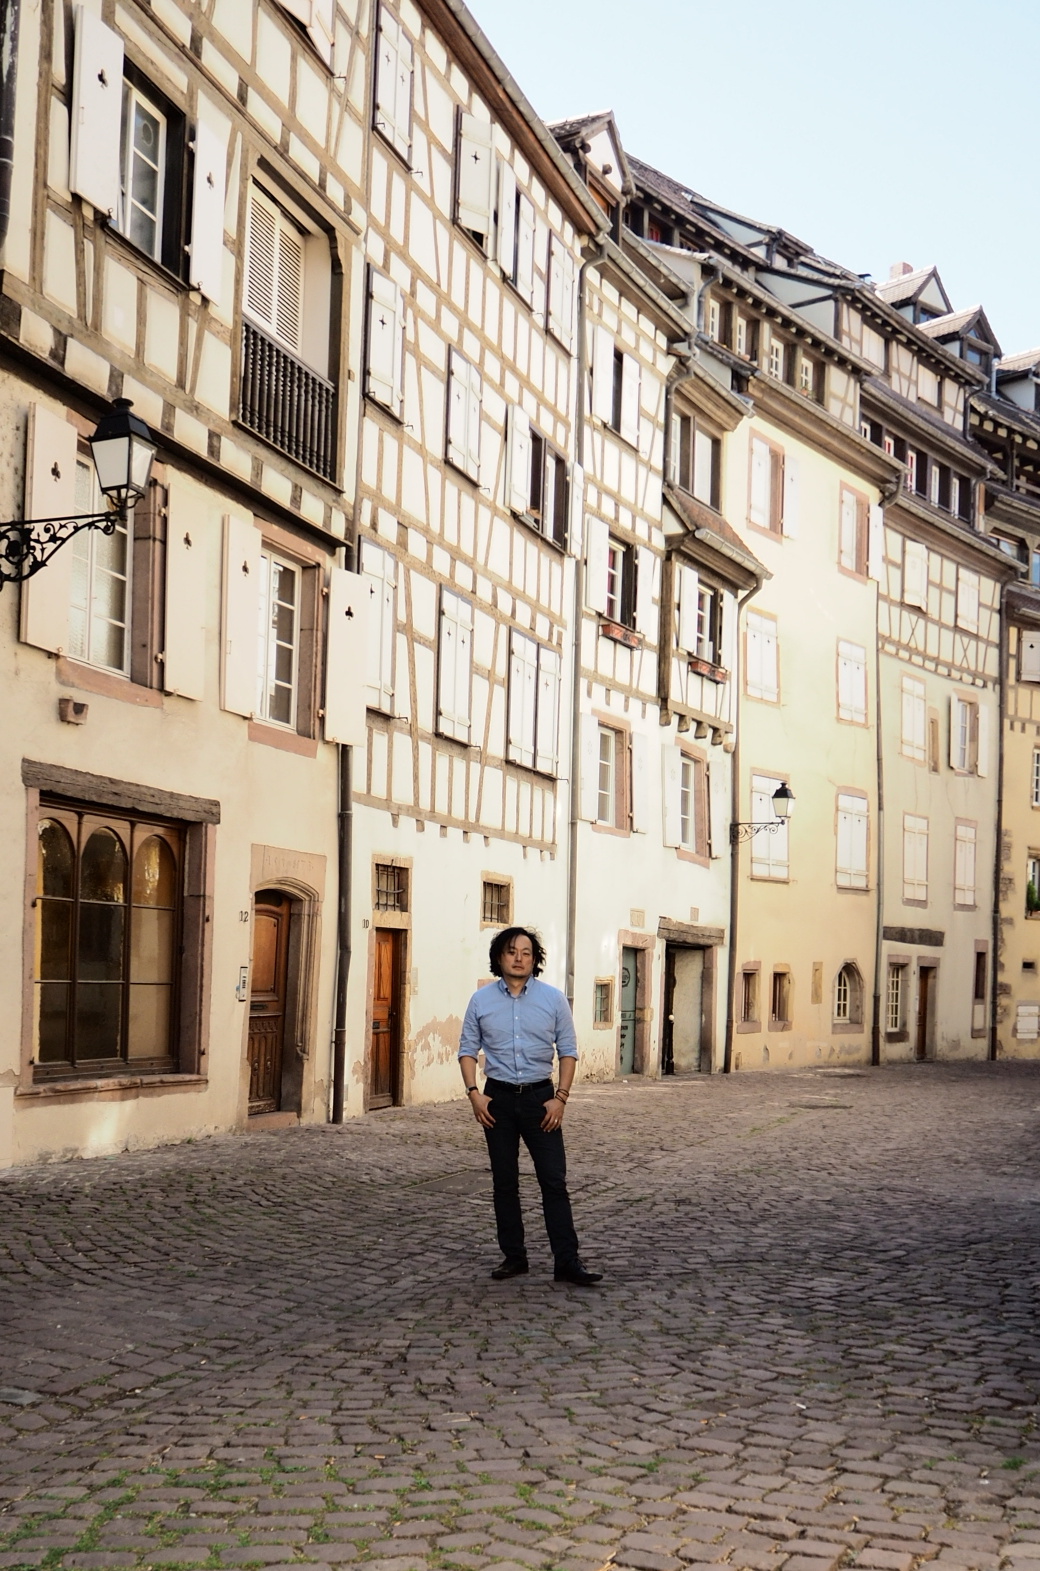 Yoshi standing in a deserted sidestreet in Colmar